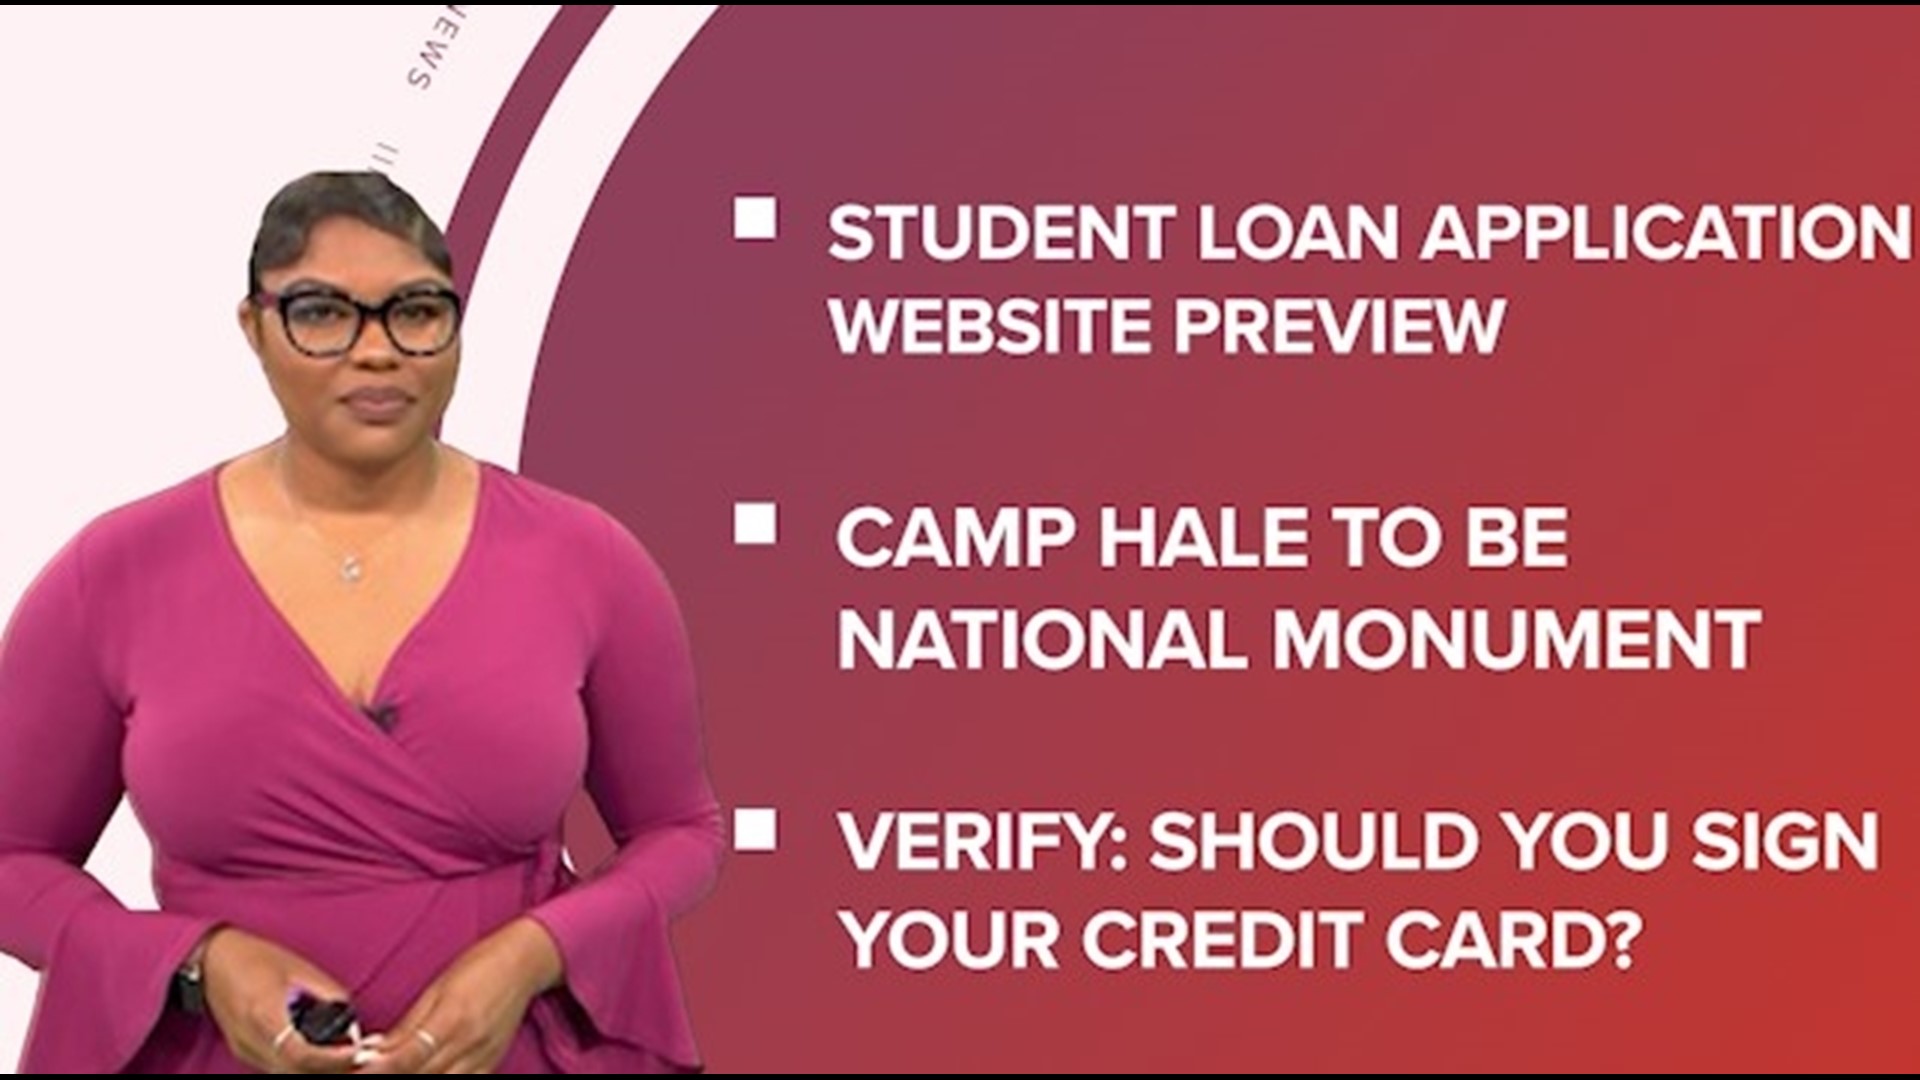 A look at what is happening in the news from an update on the student loan relief application process to Camp Hale becoming a national monument.